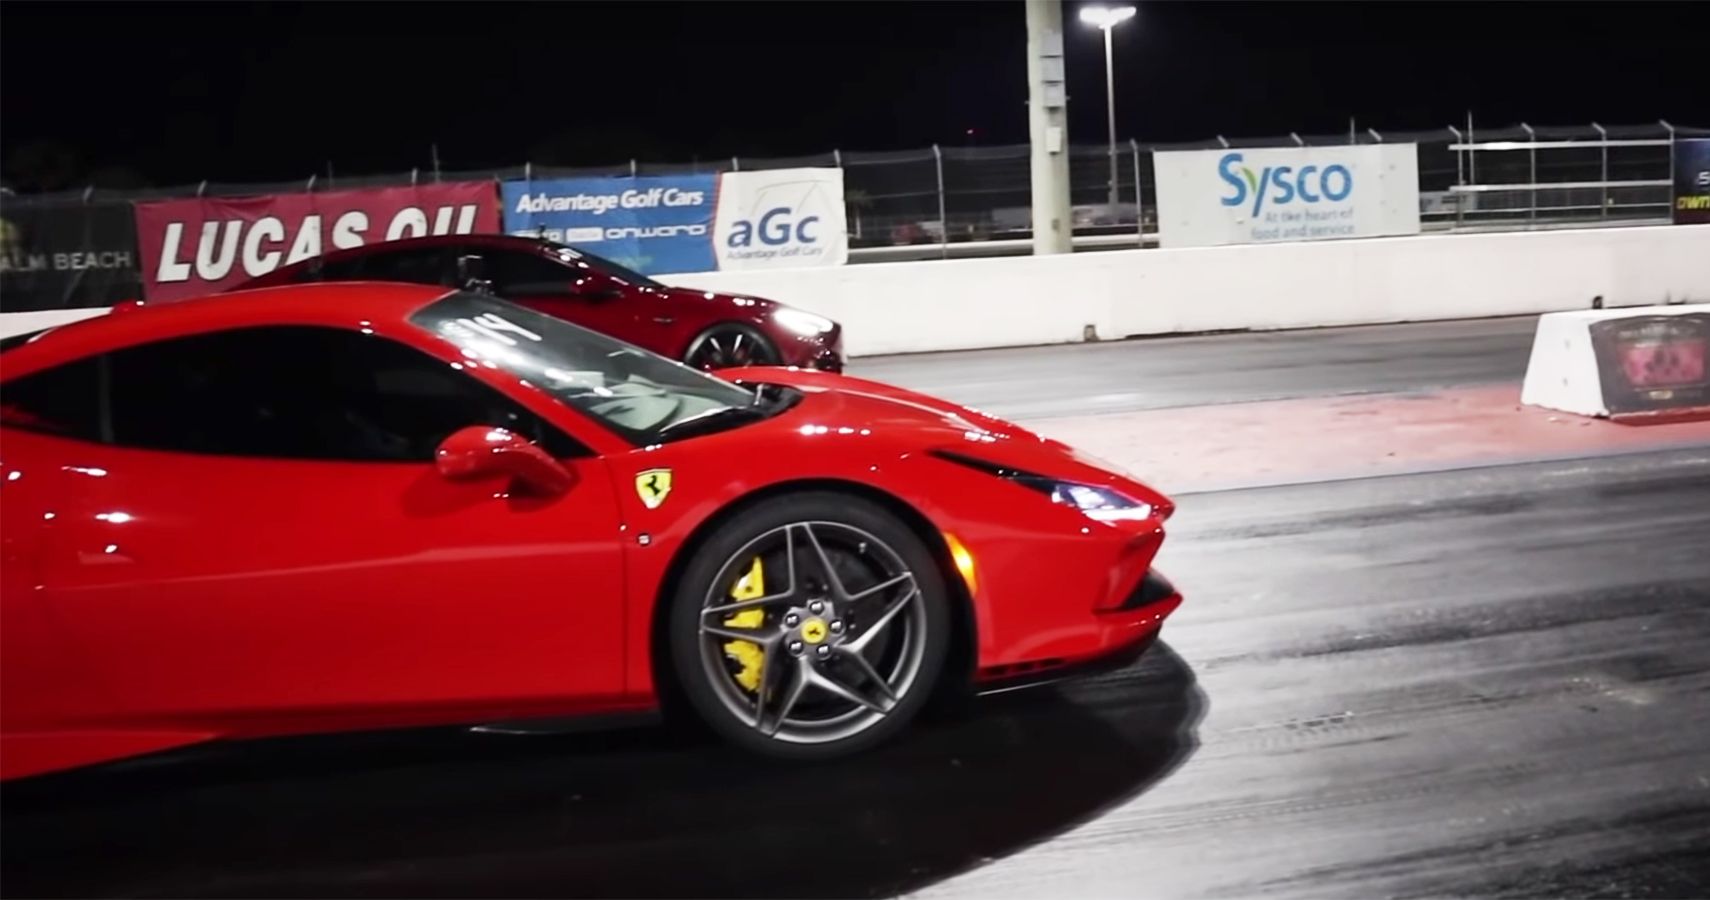 Not Even “Cheetah Stance” Can Help This Tesla Model S Outpace A Ferrari F8 Tributo In Quarter Mile Runs